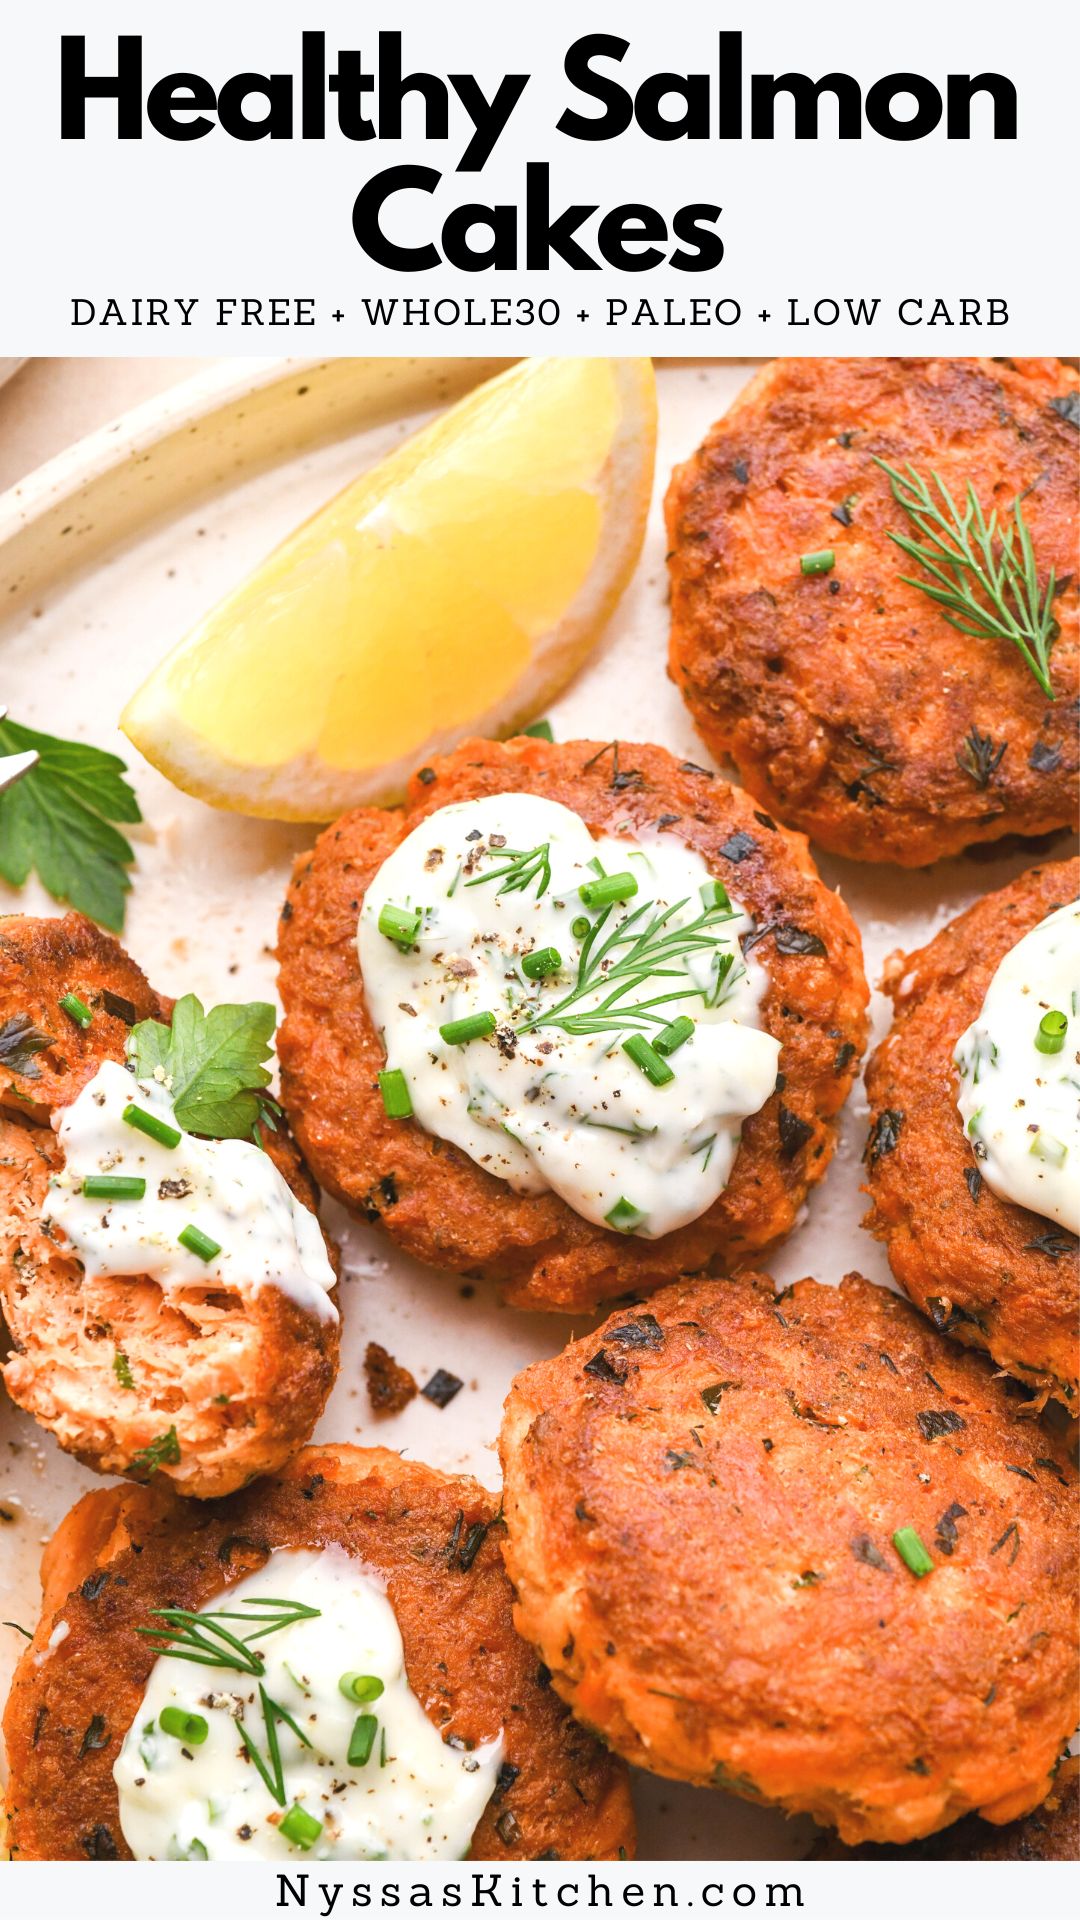 These Whole30 salmon cakes (salmon patties) are a delicious, protein rich recipe made with fresh salmon, herbs, and without breadcrumbs, panko, or flour. Easy enough to make on a weeknight but impressive enough to make for a dinner party! Crispy, loaded with flavor and nutrient dense. Whole30, paleo, gluten free, dairy free, low carb, and keto friendly.